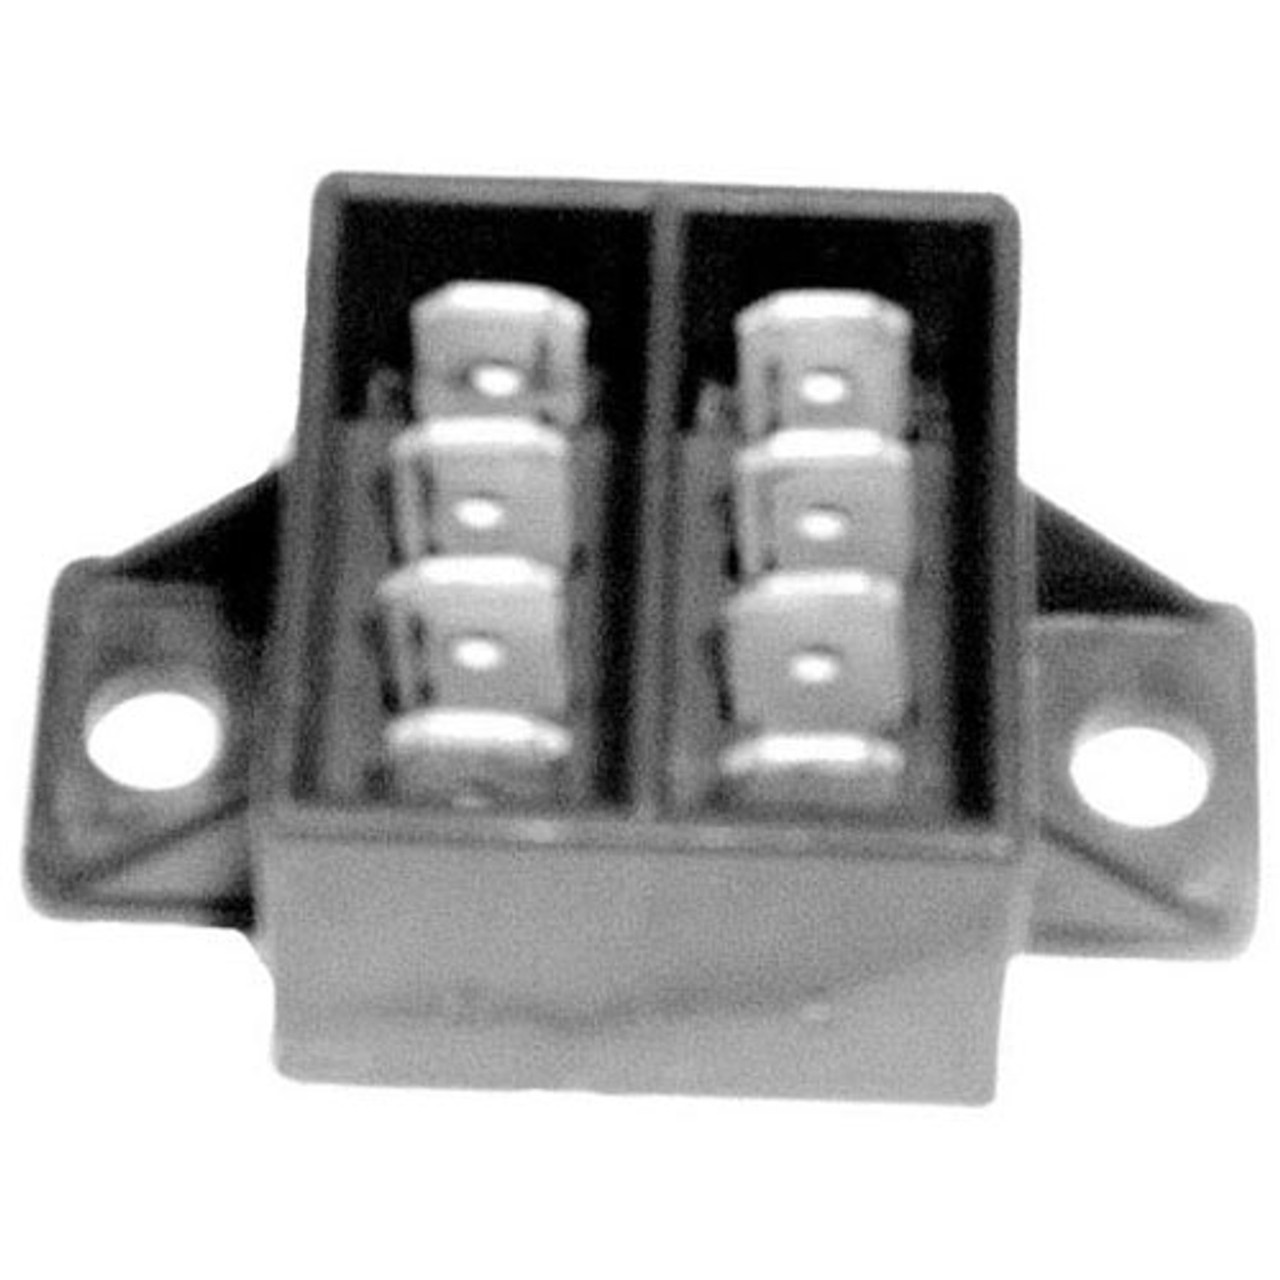 Terminal Block - Replacement Part For Lincoln 21858SP